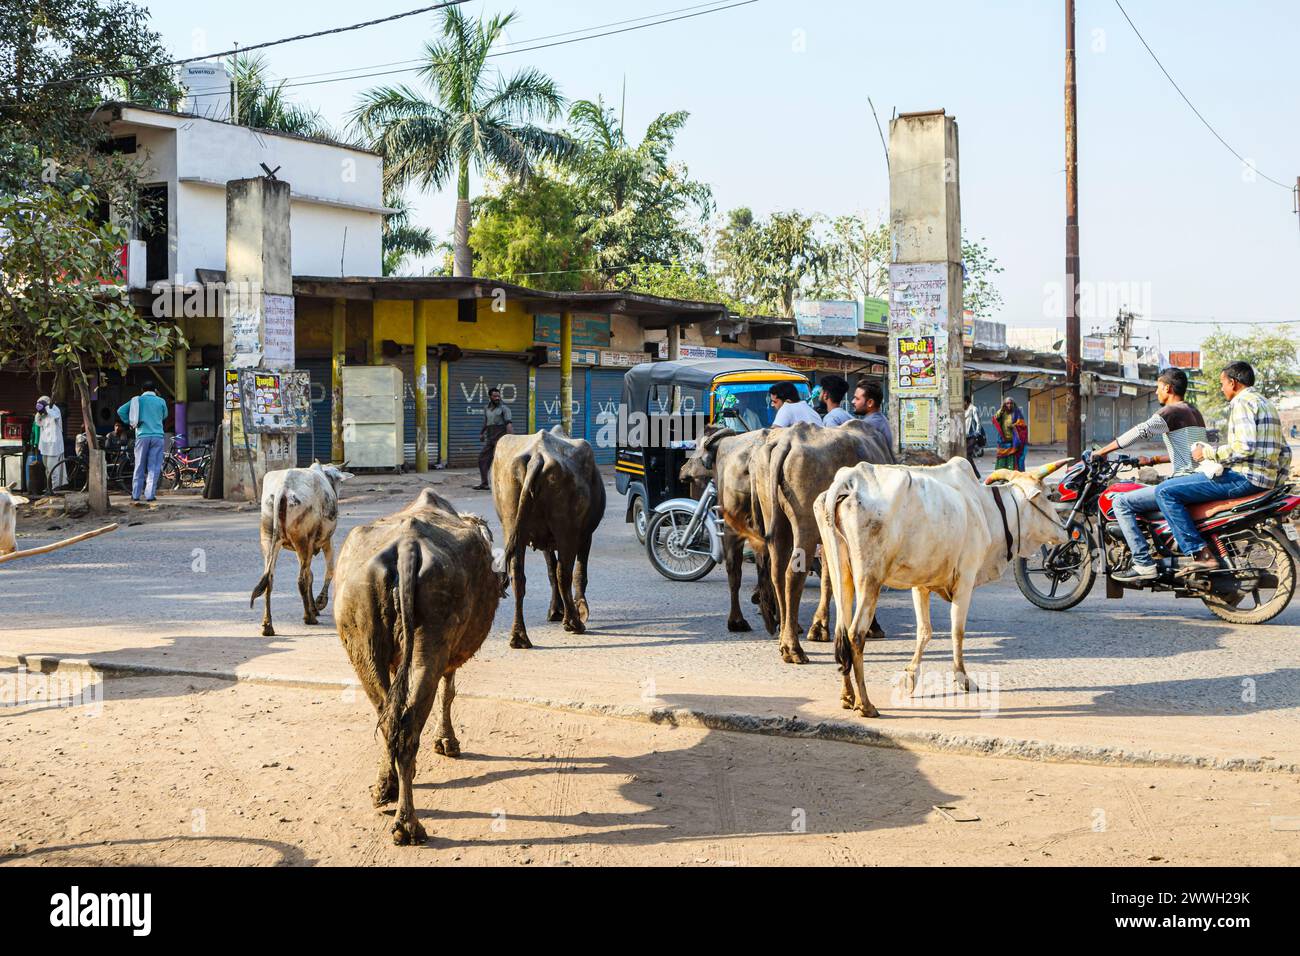 Typical street scene: cows walking in the road with local people, traffic and motorbikes in a town in the Umaria district of Madhya Pradesh, India Stock Photo